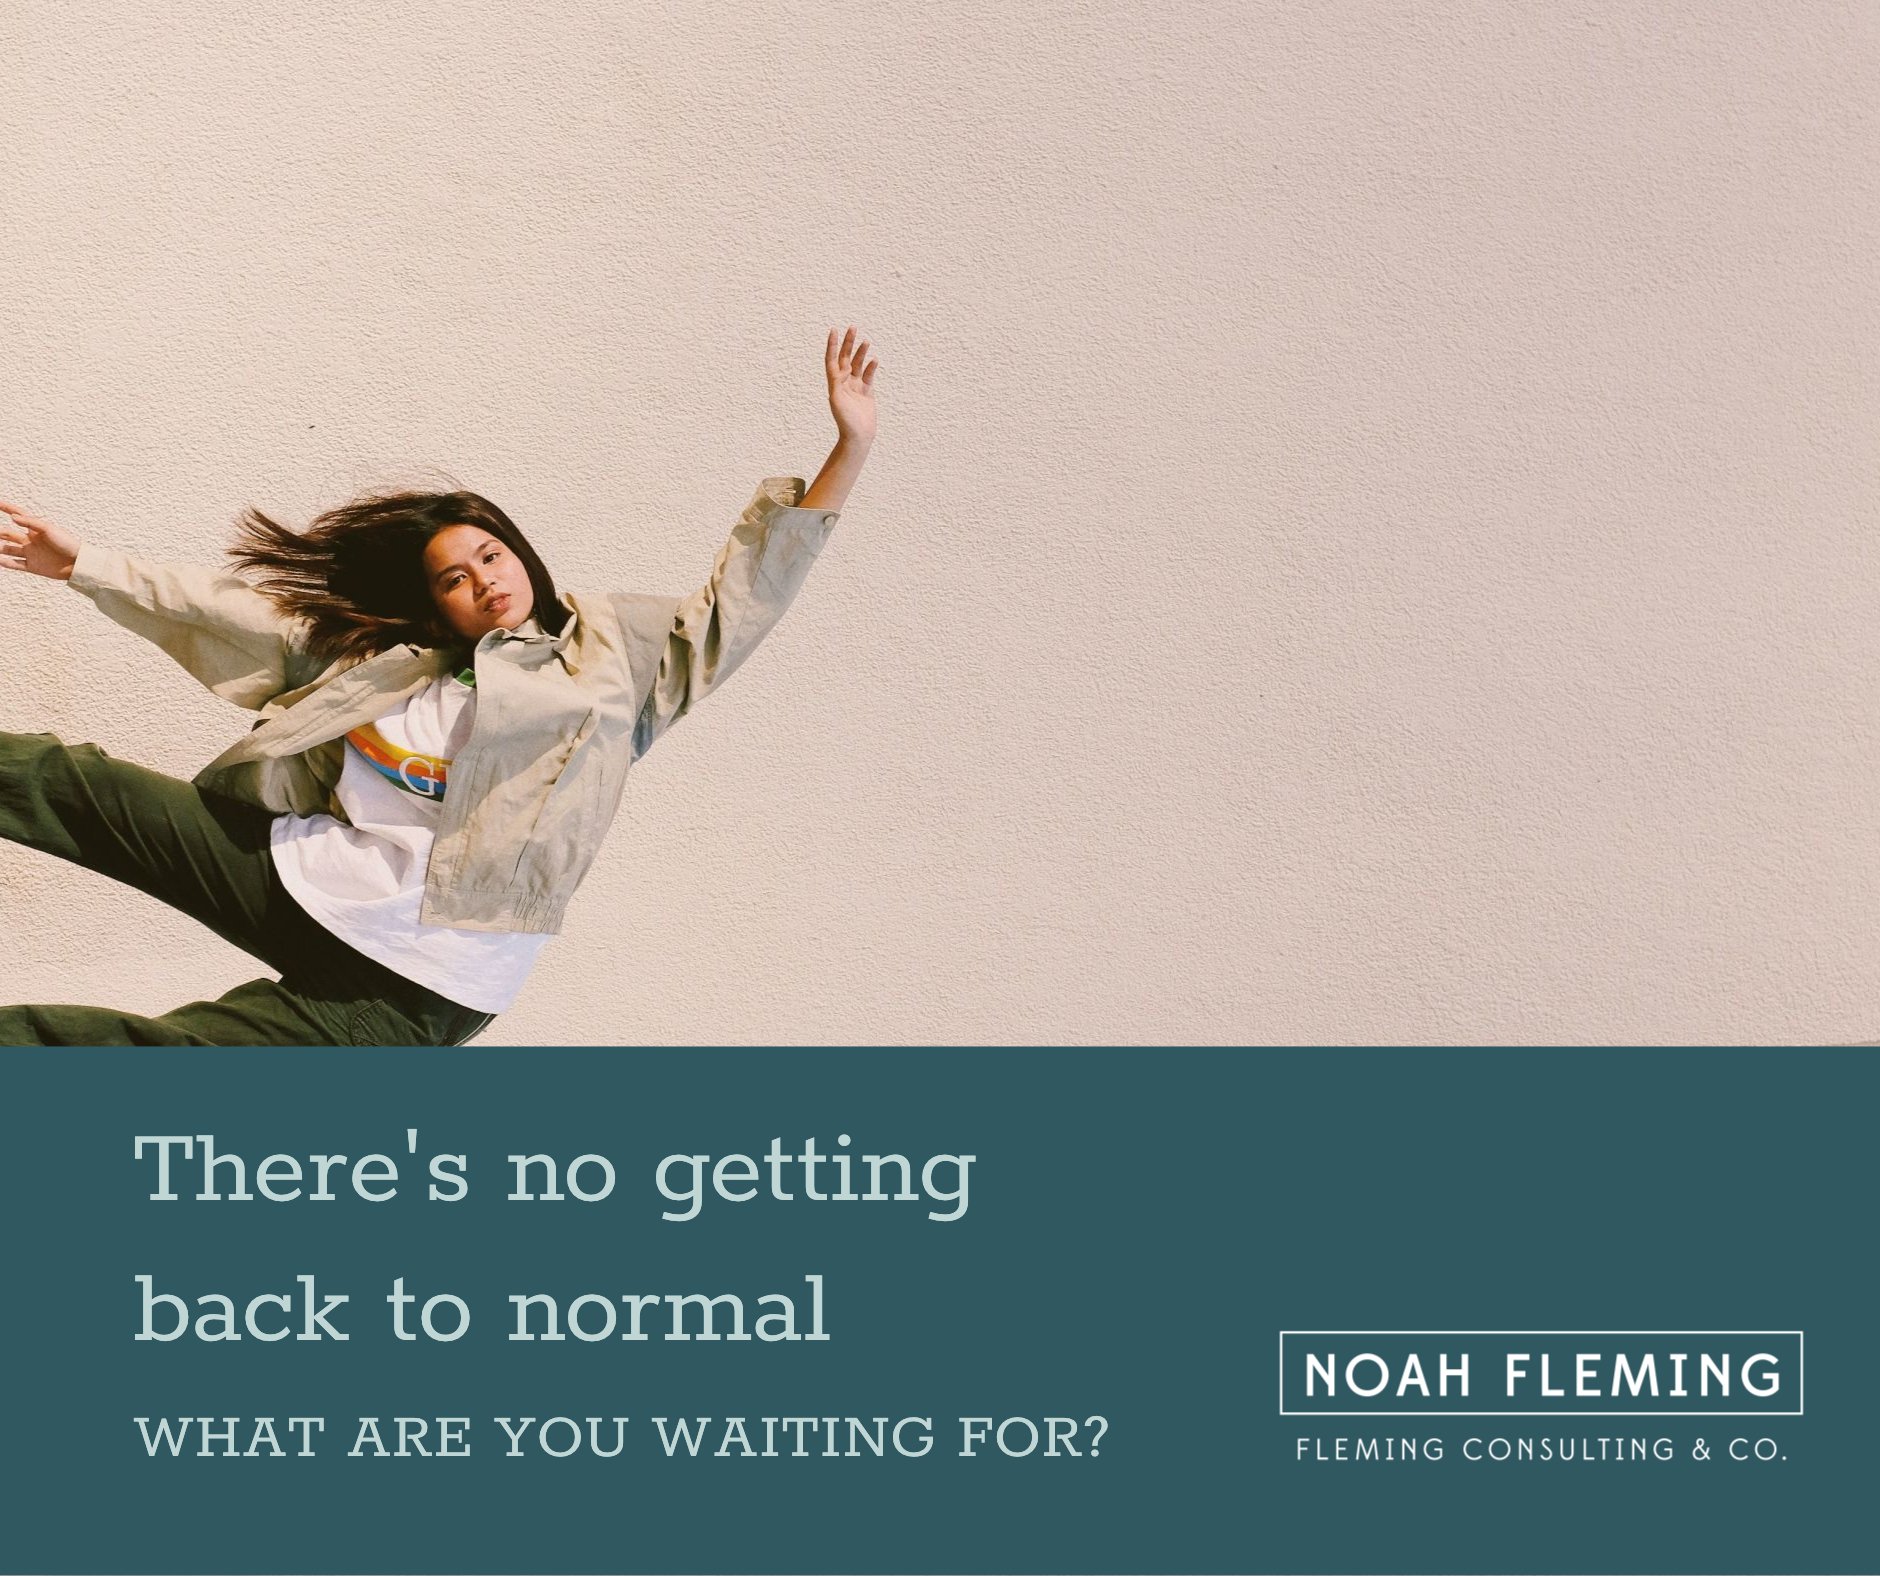 There's No "Getting Back To Normal" - What Are You Waiting For?